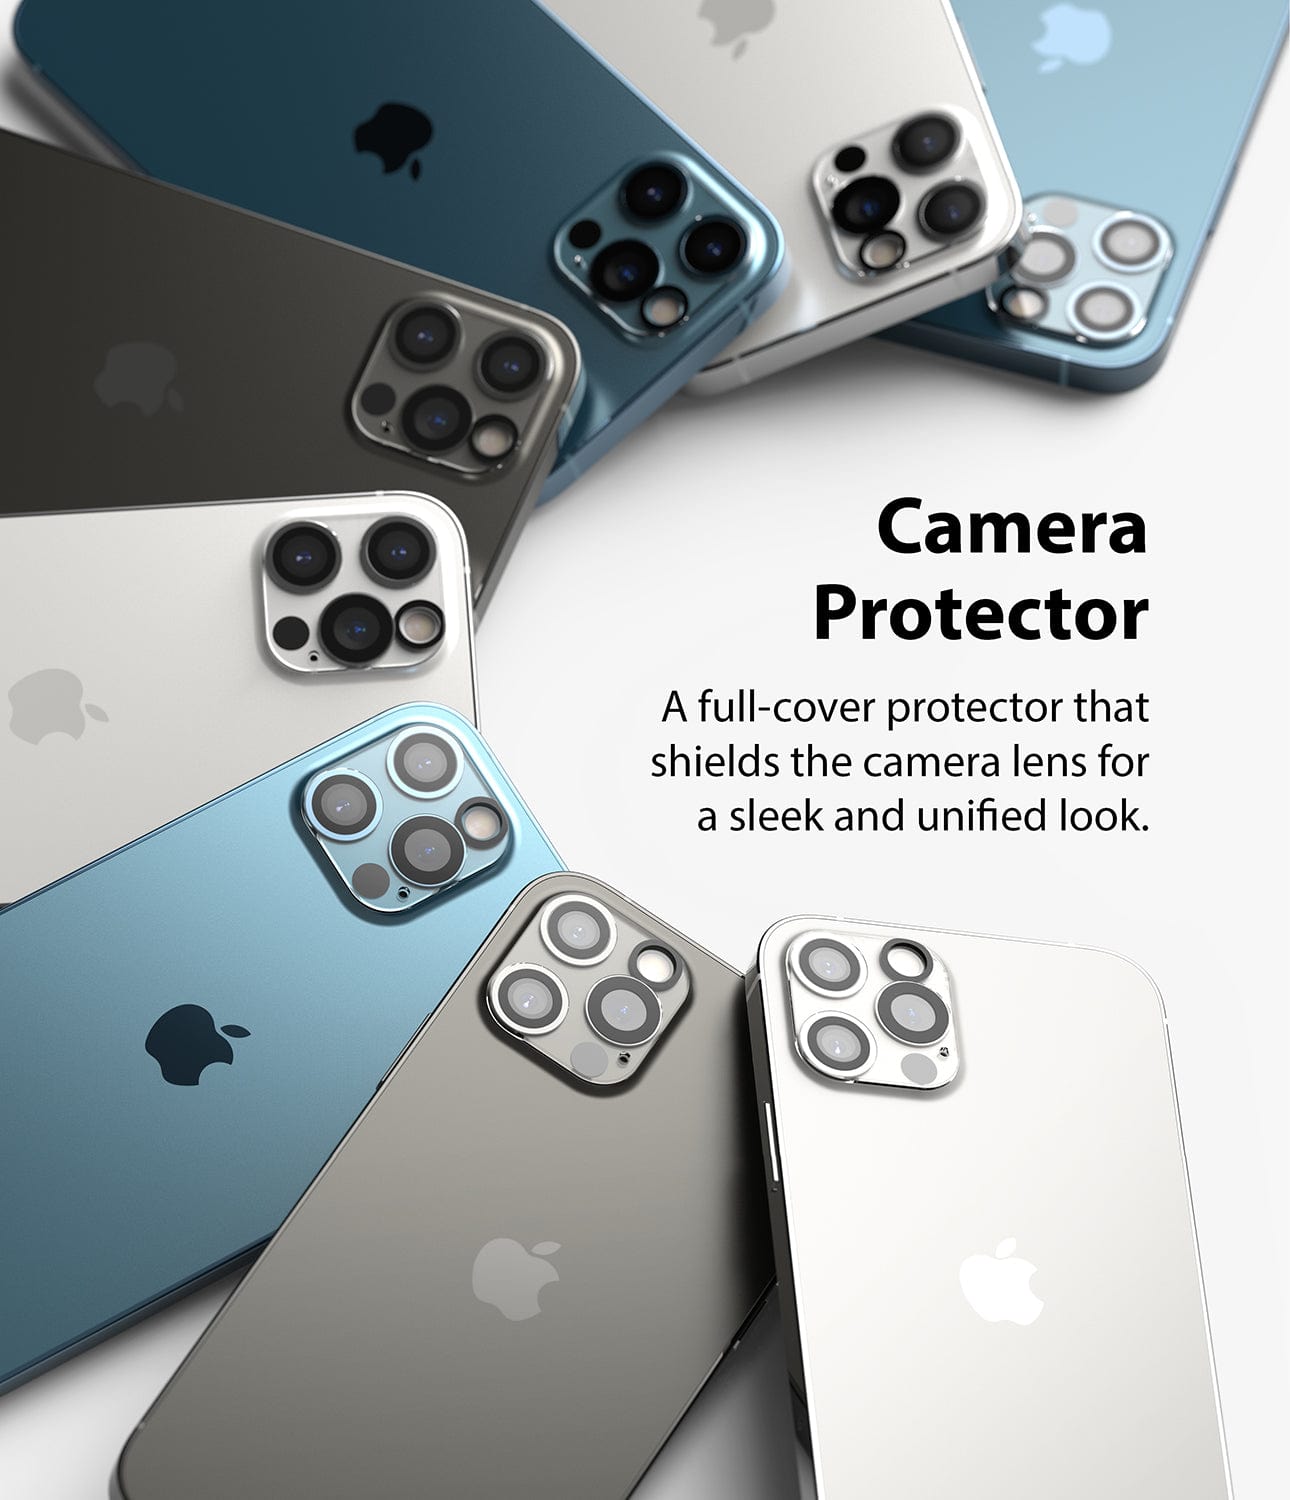 Camera Protector for iPhone 12 Pro Max